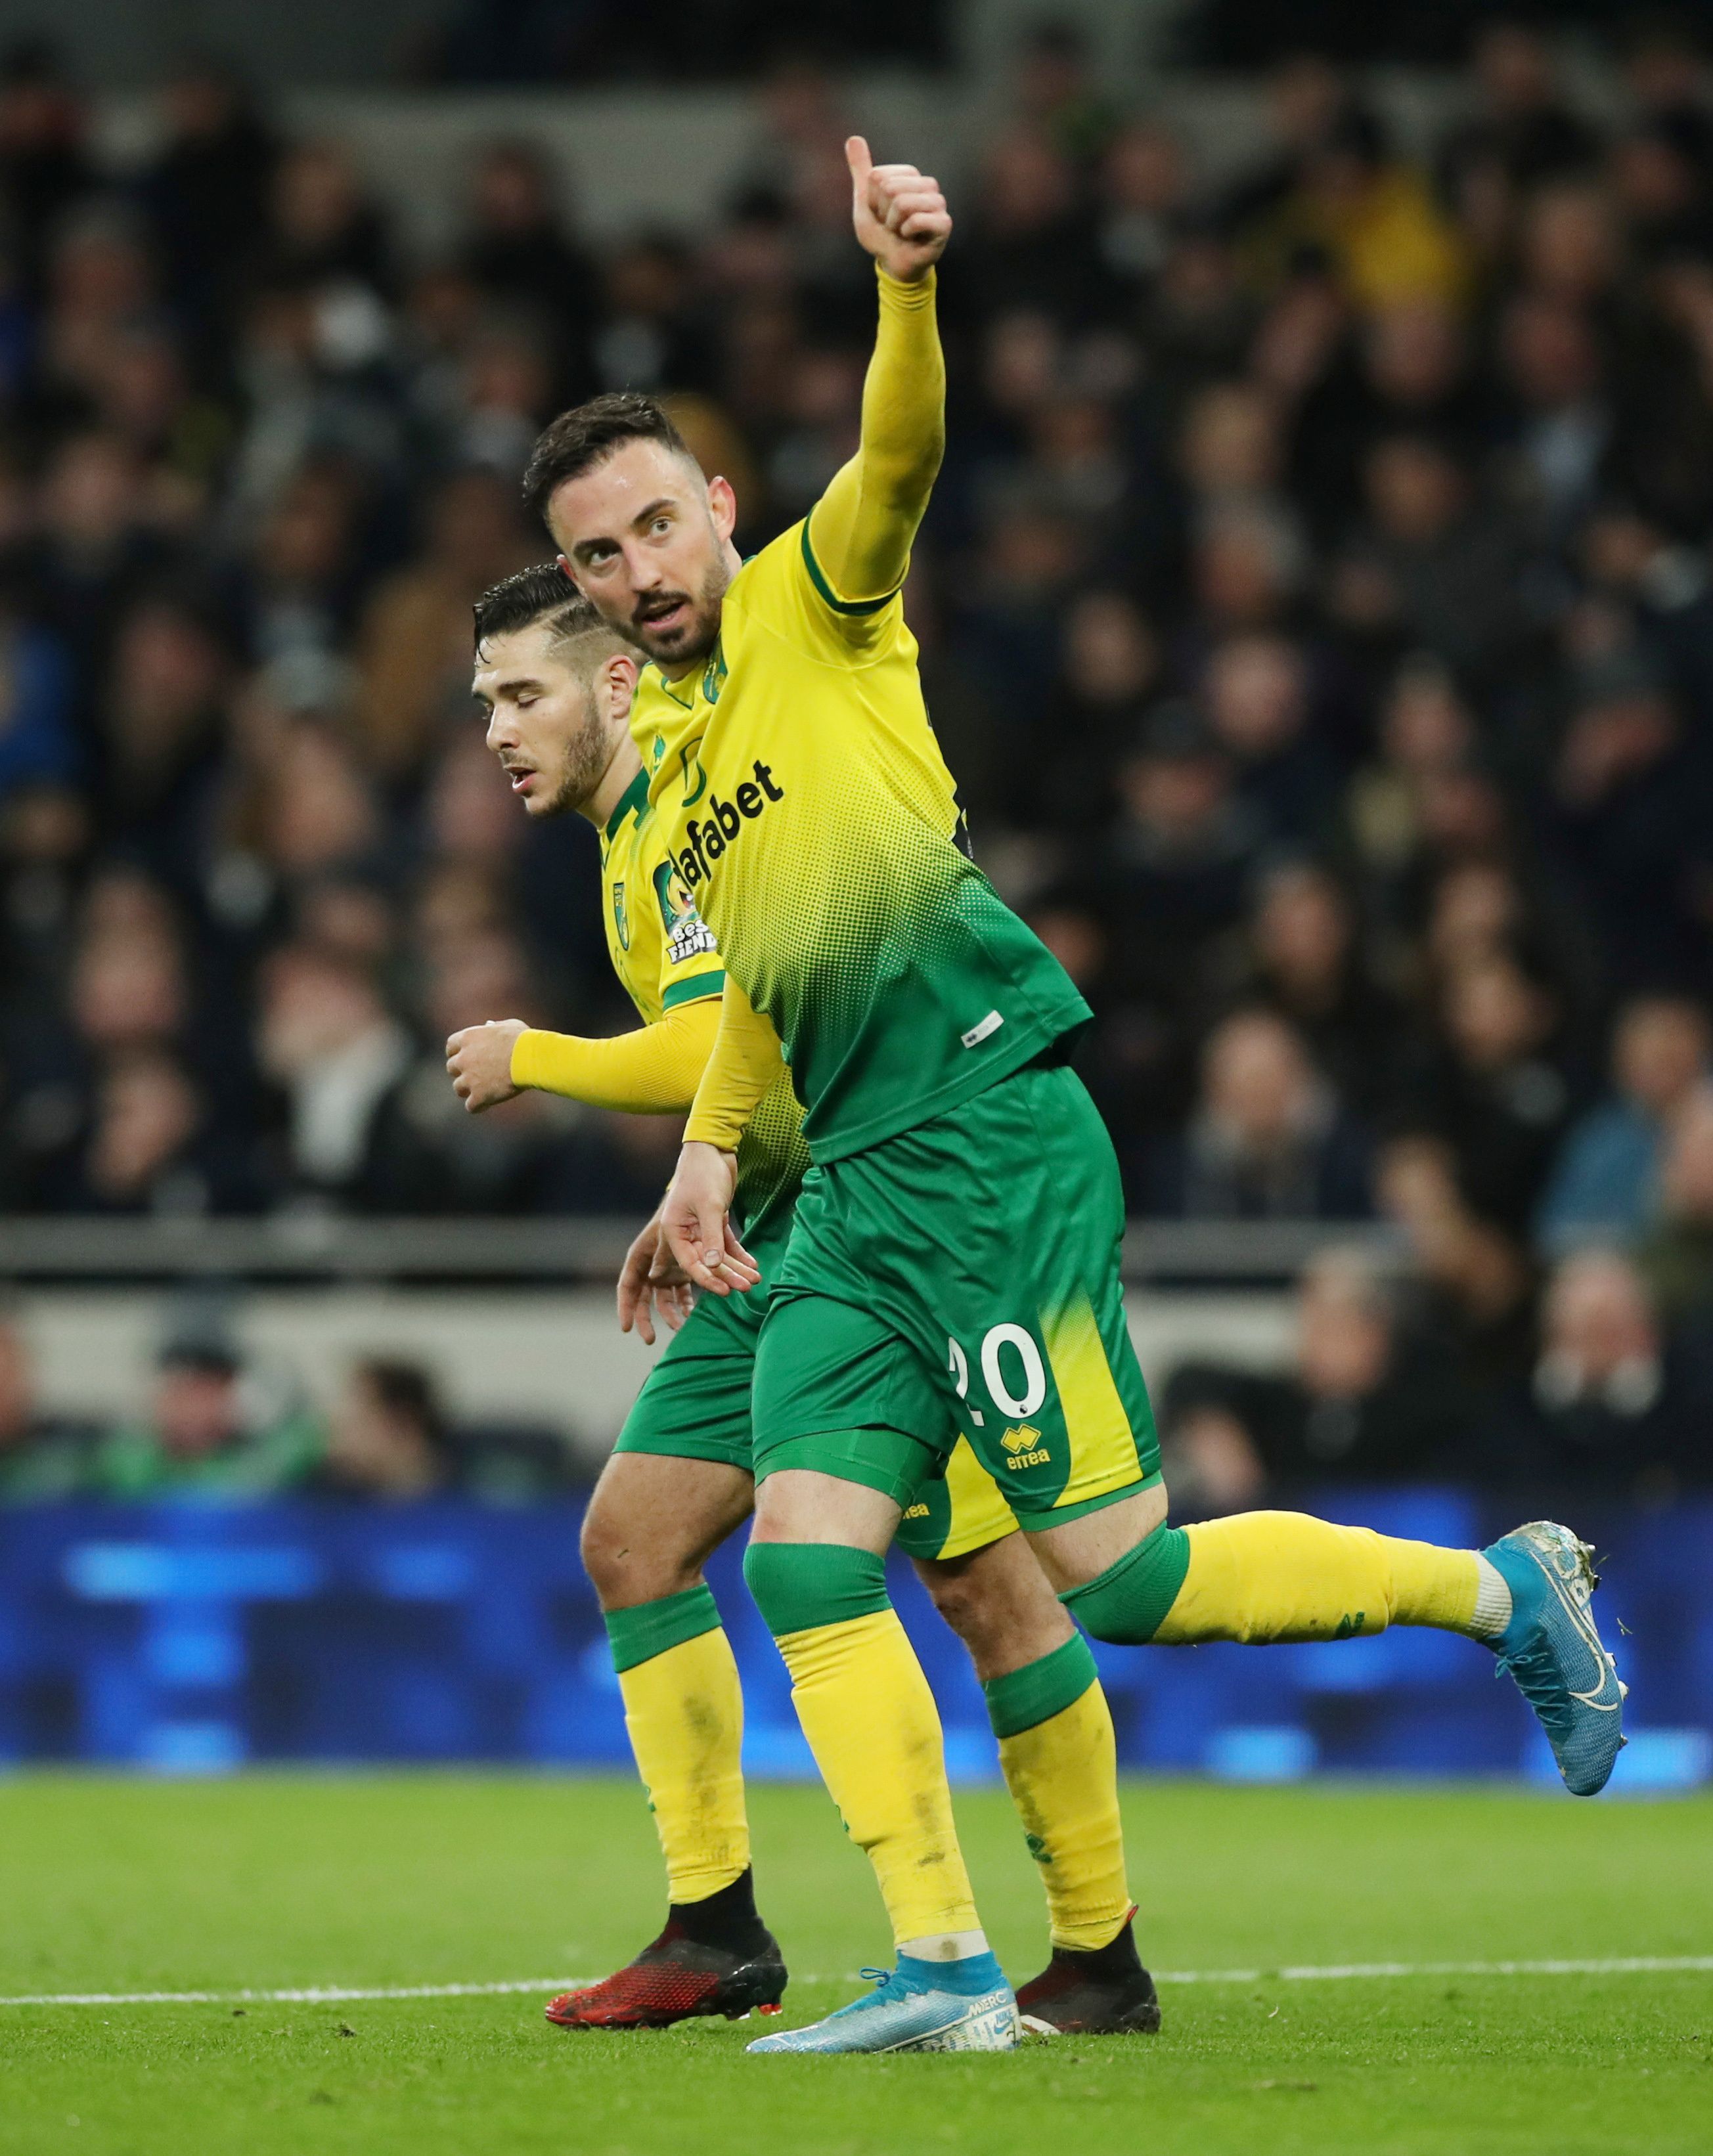 Drmic flopped at Norwich.